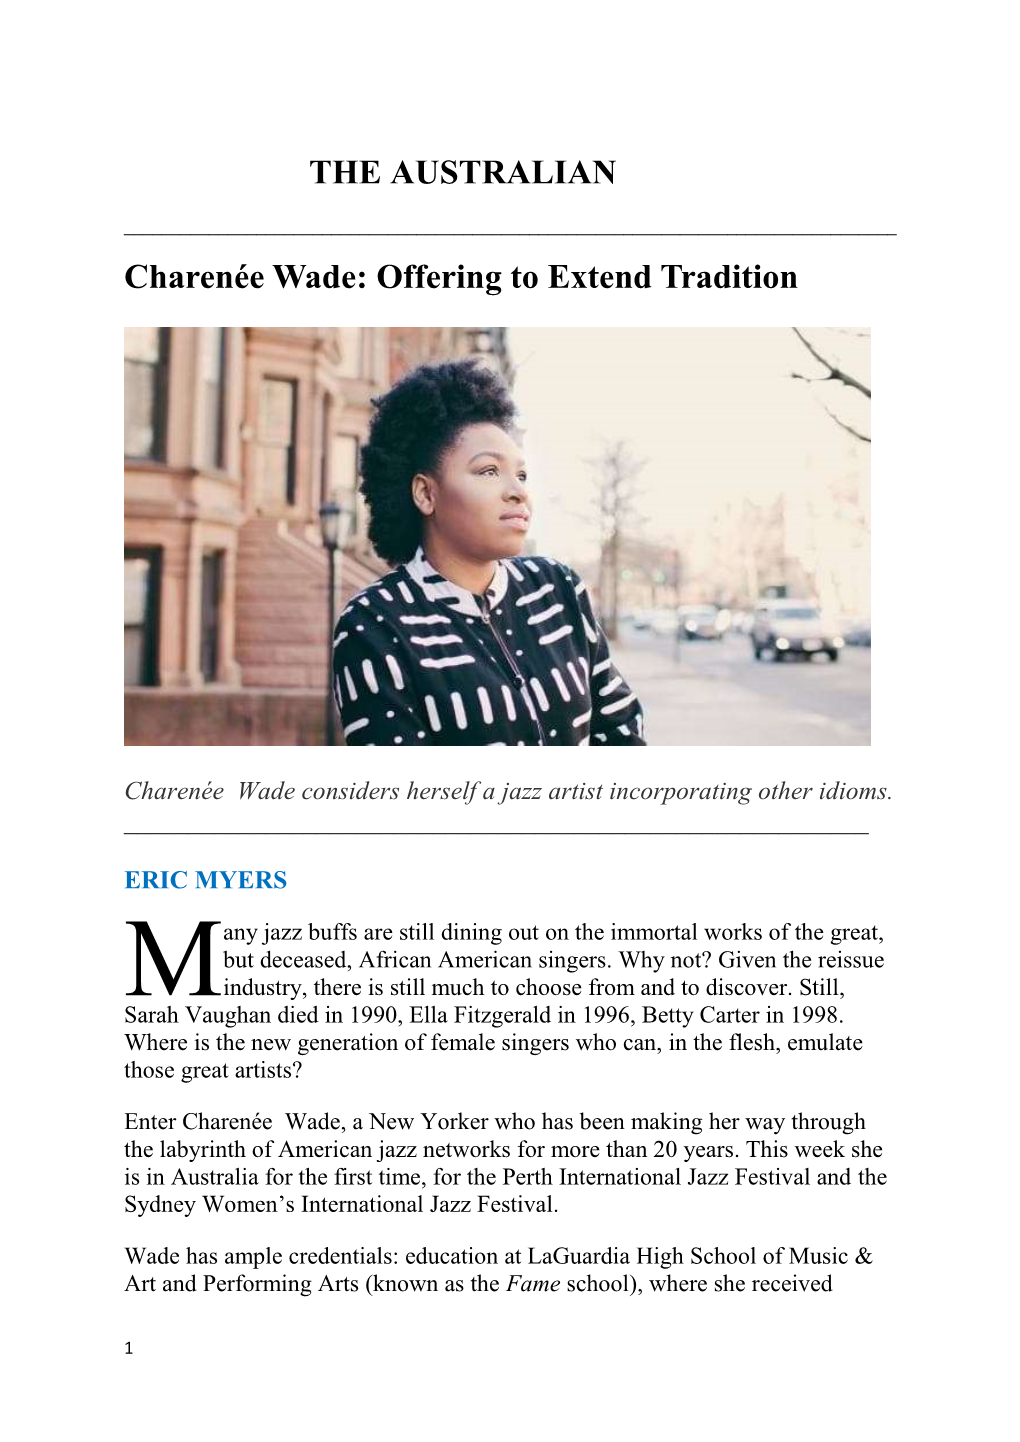 Charenée Wade: Offering to Extend Tradition